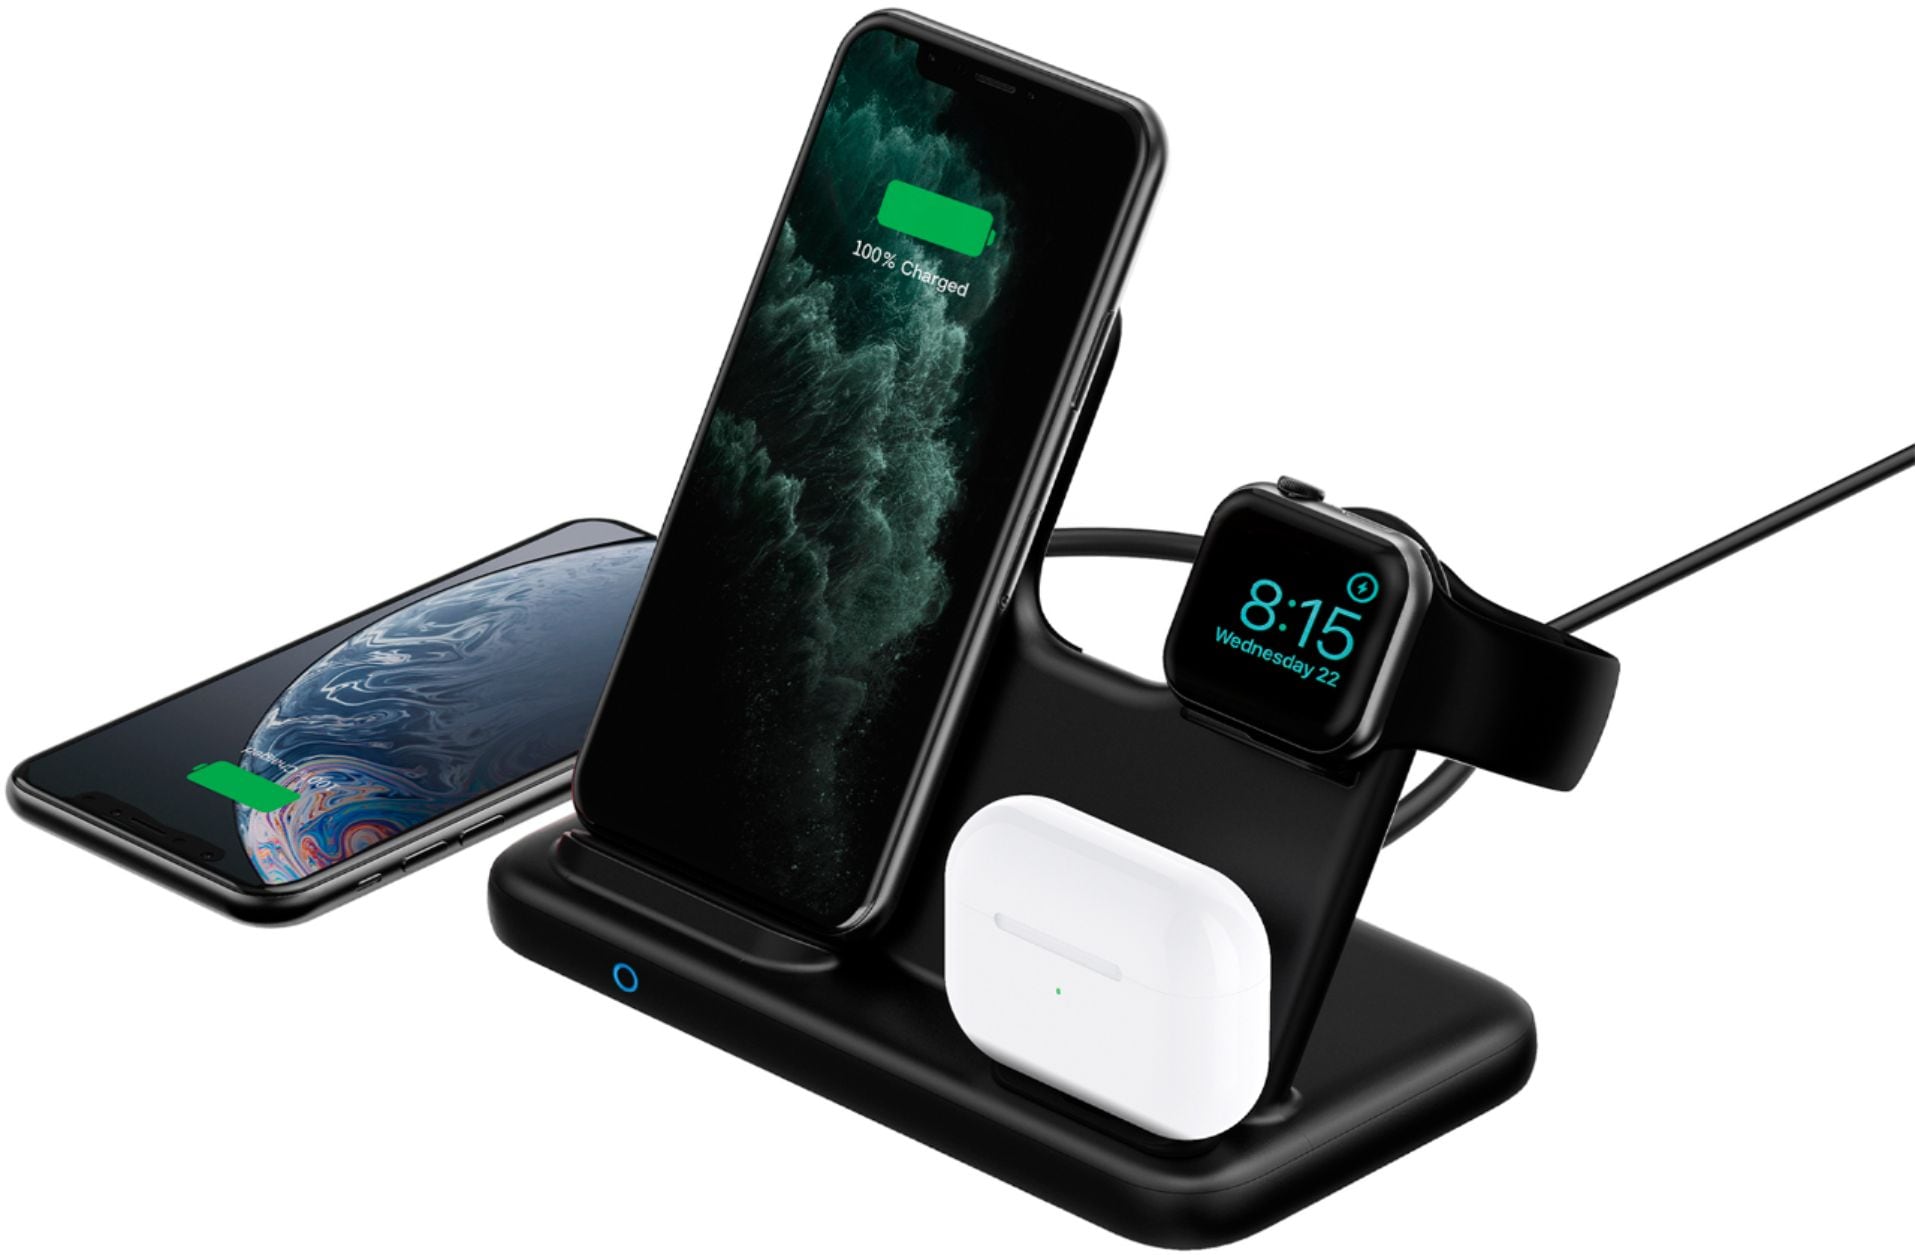 Anker - B2575J11-1 PowerWave 4-in-1 Charging Station with Wireless Charger for Smartphones, Airpods, Apple Watch, and a Fourth device - Black